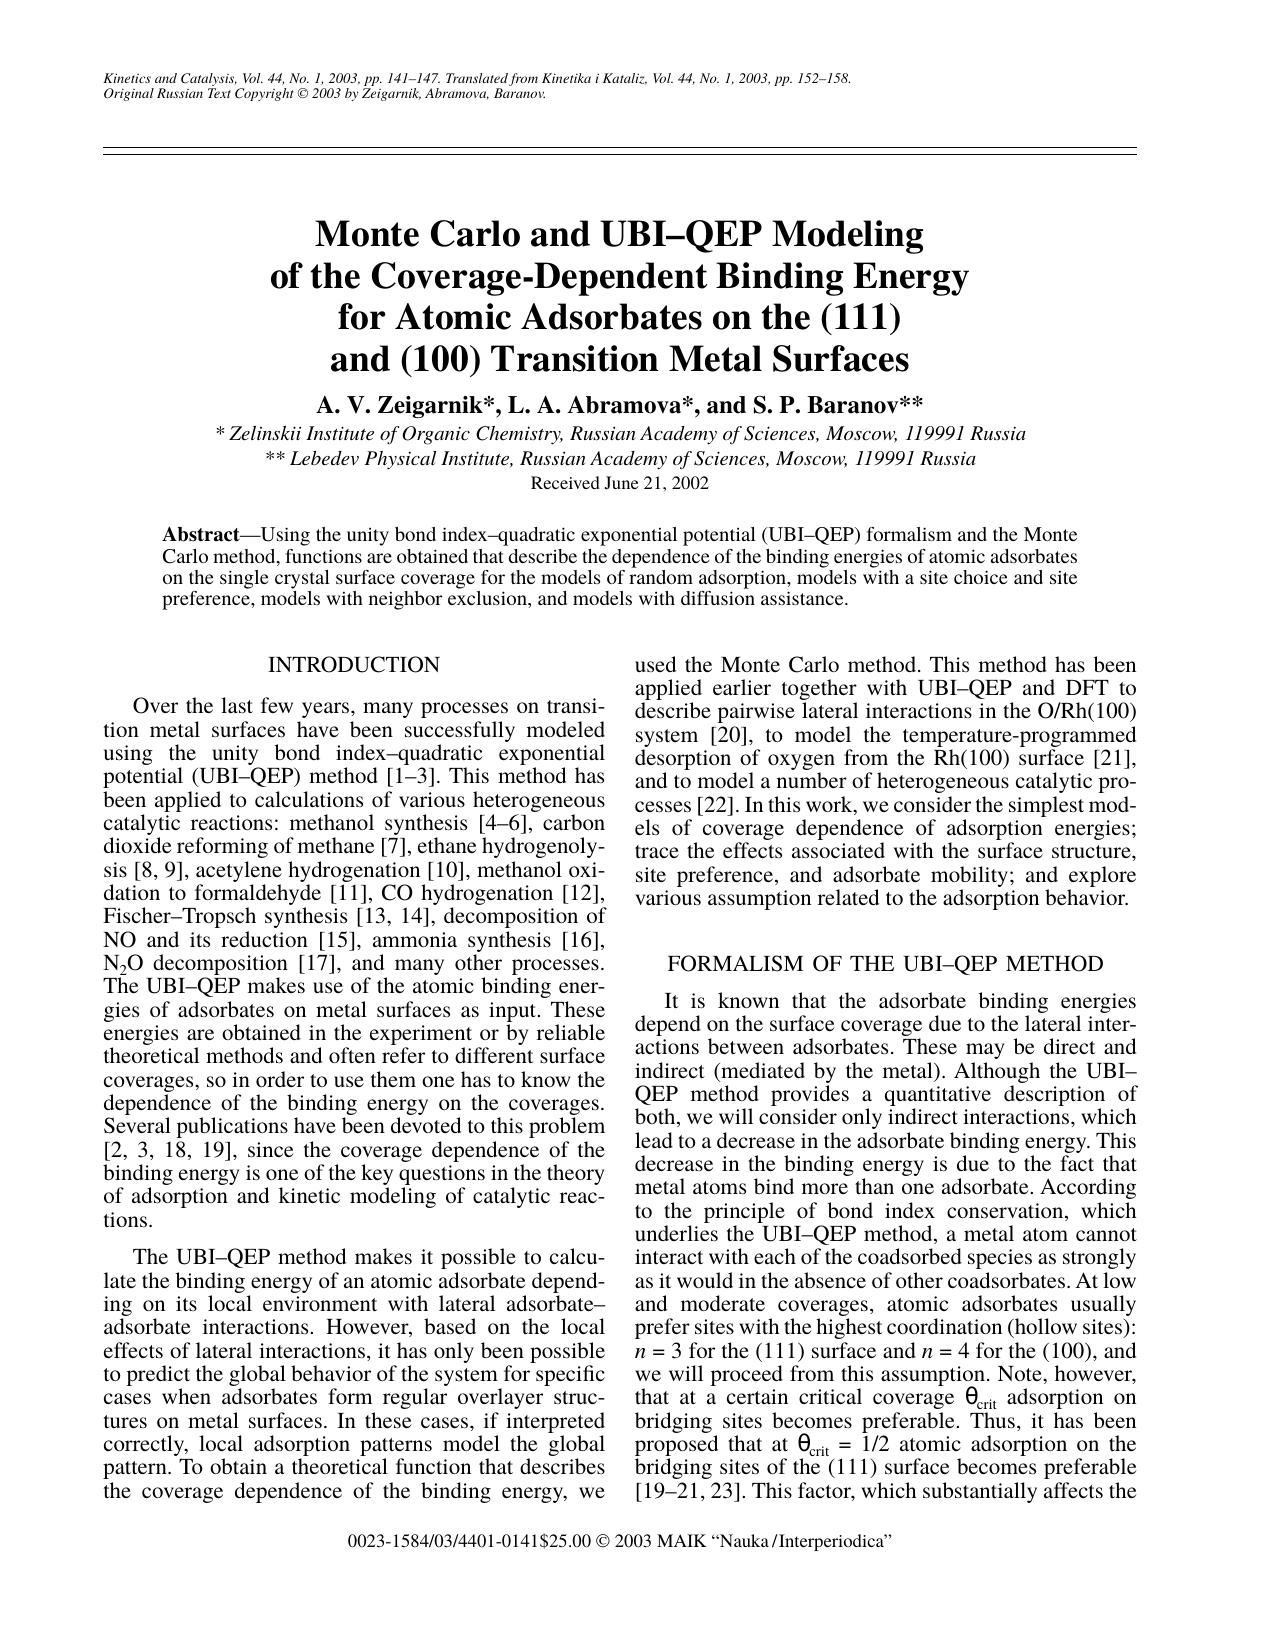 Monte Carlo and UBI&#x2013;QEP Modeling of the Coverage-Dependent Binding Energy for Atomic Adsorbates on the (111) and (100) Transition Metal Surfaces by Unknown